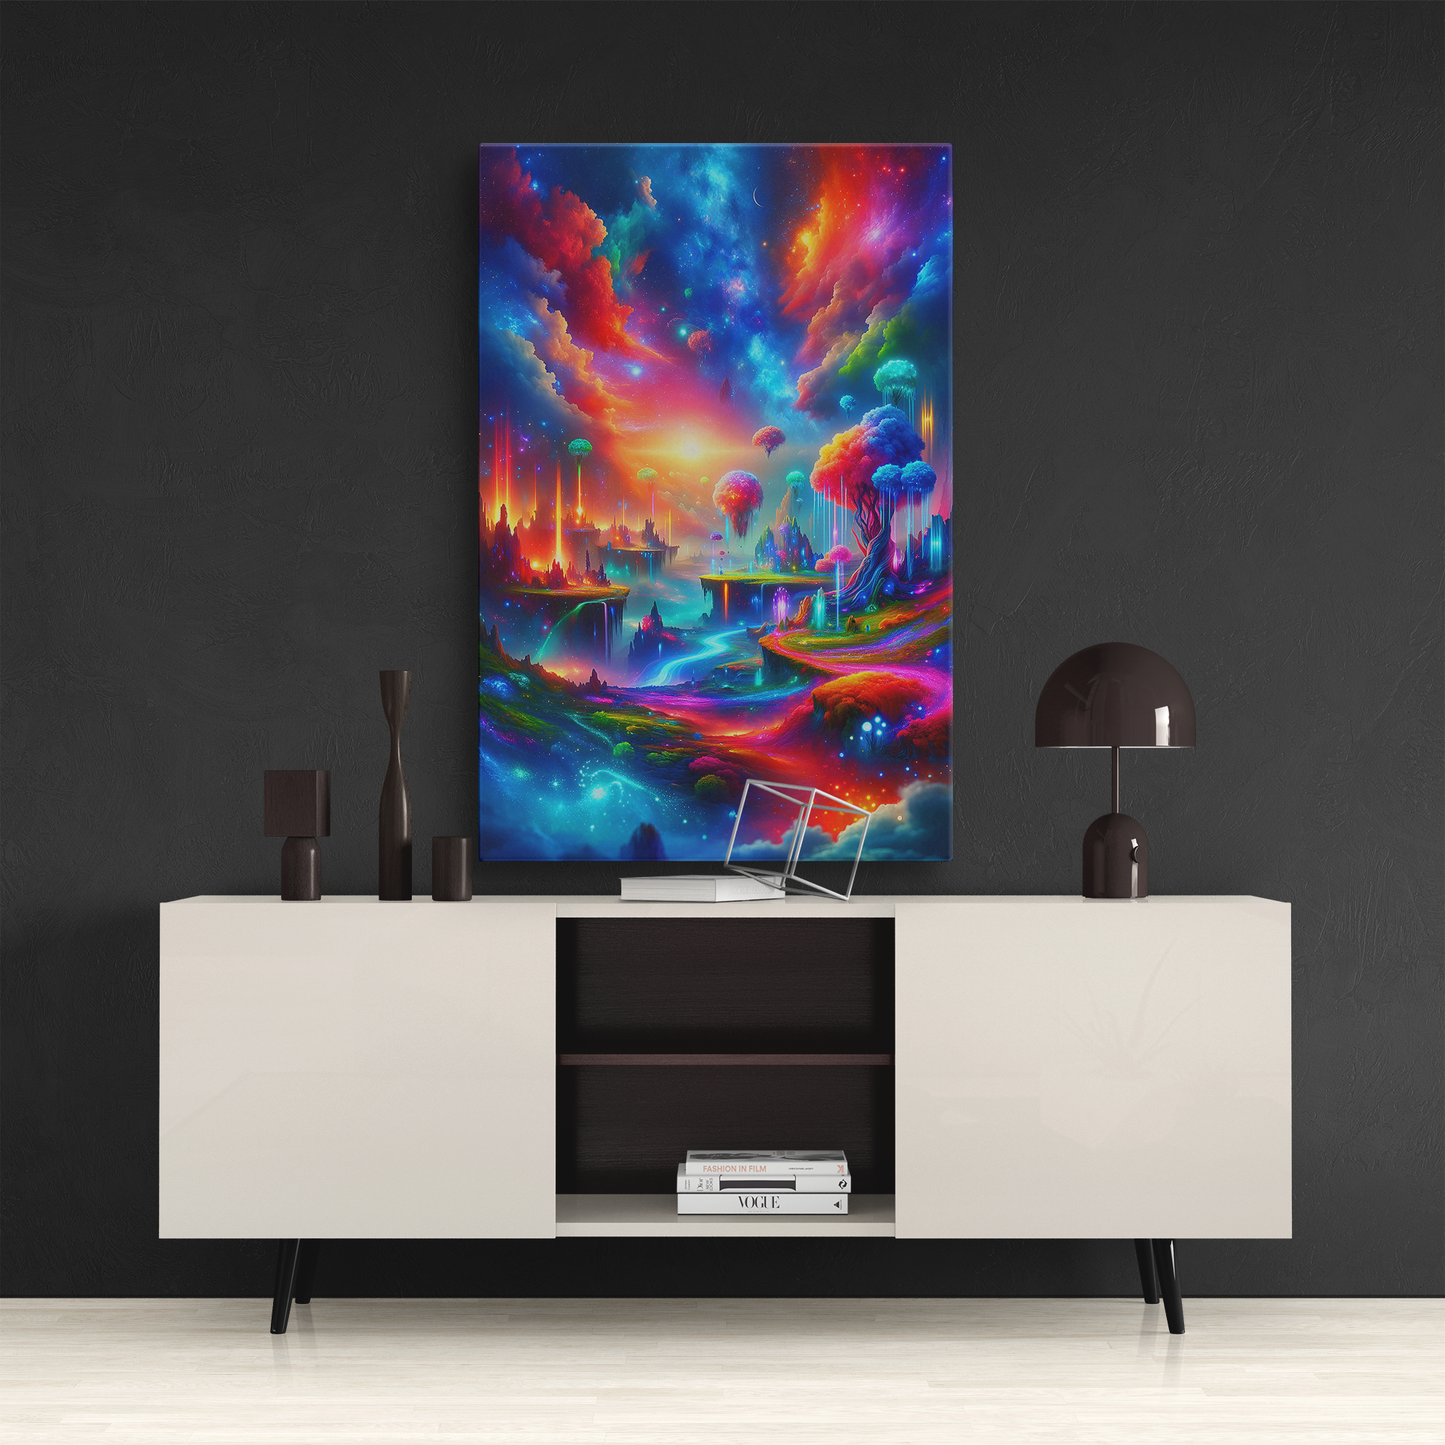 Vivid Dreamscape Fusion (Canvas)Engaging Introductory Paragraph:
Struggling with low-quality canvases? Switch to RimaGallery! Our canvases are more than just a purchase; they're a statement of qualRimaGallery